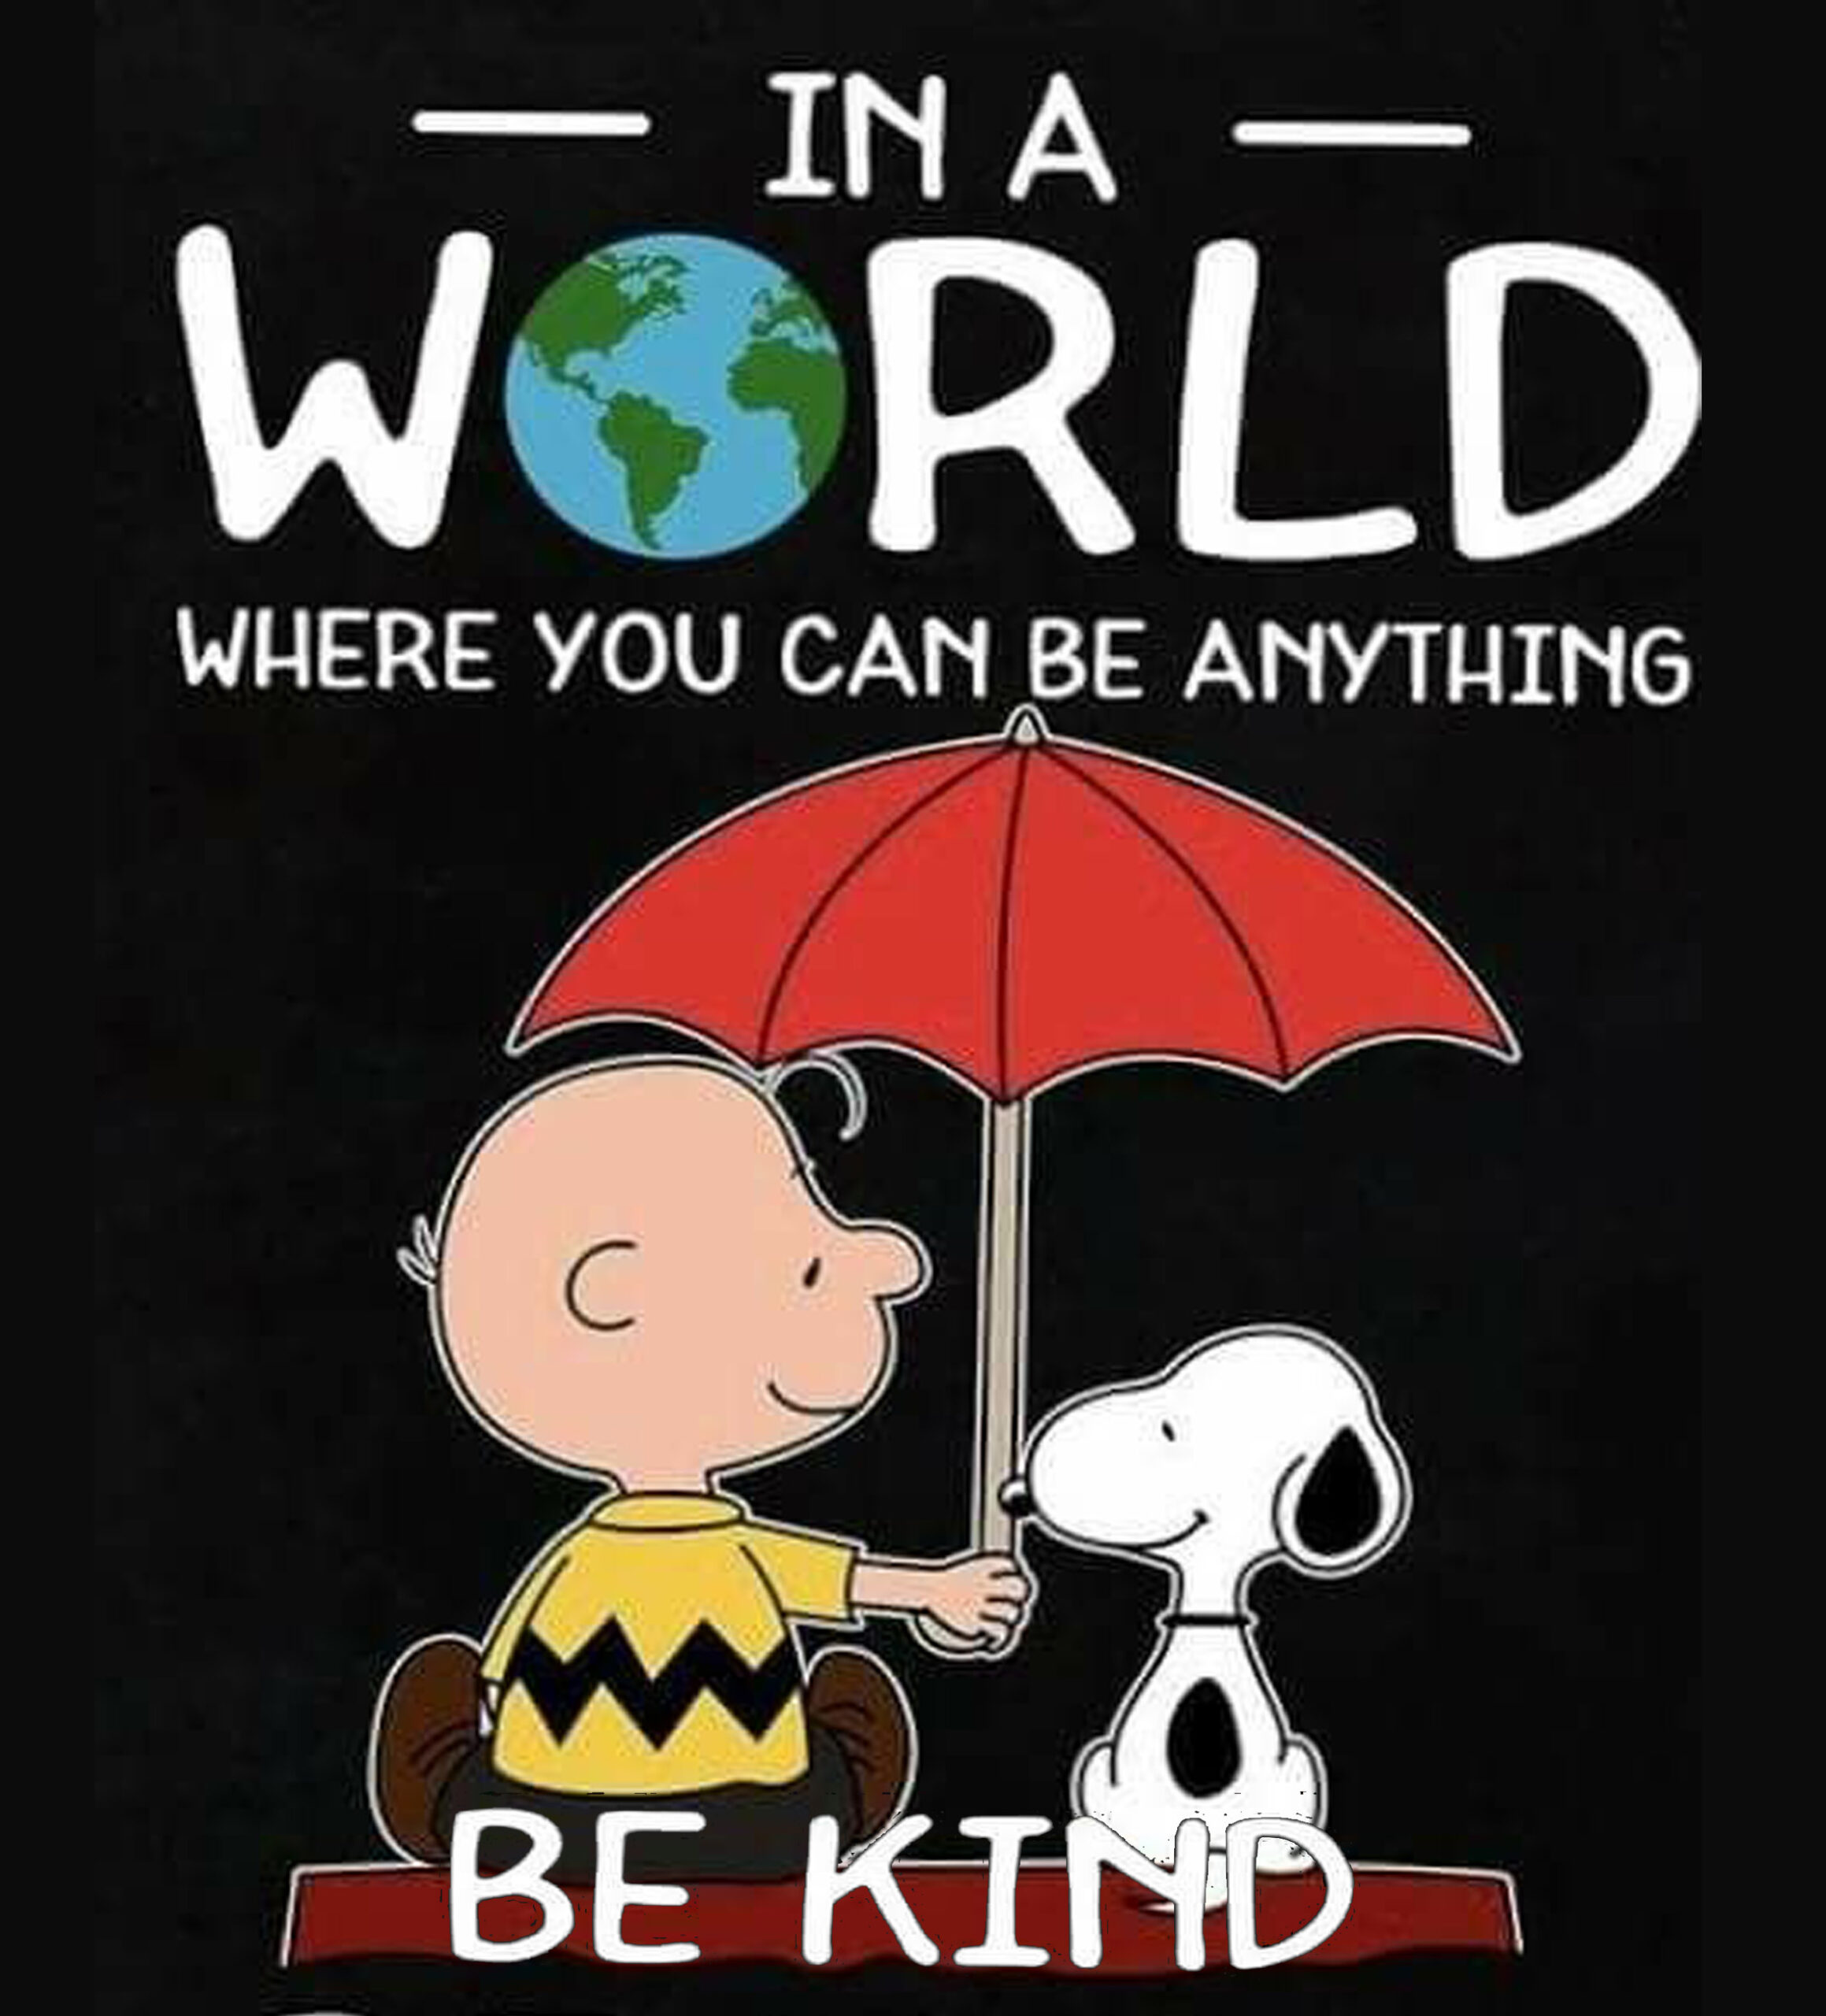 In a world where you can be anything...Be Kind! NeedEncouragement.com